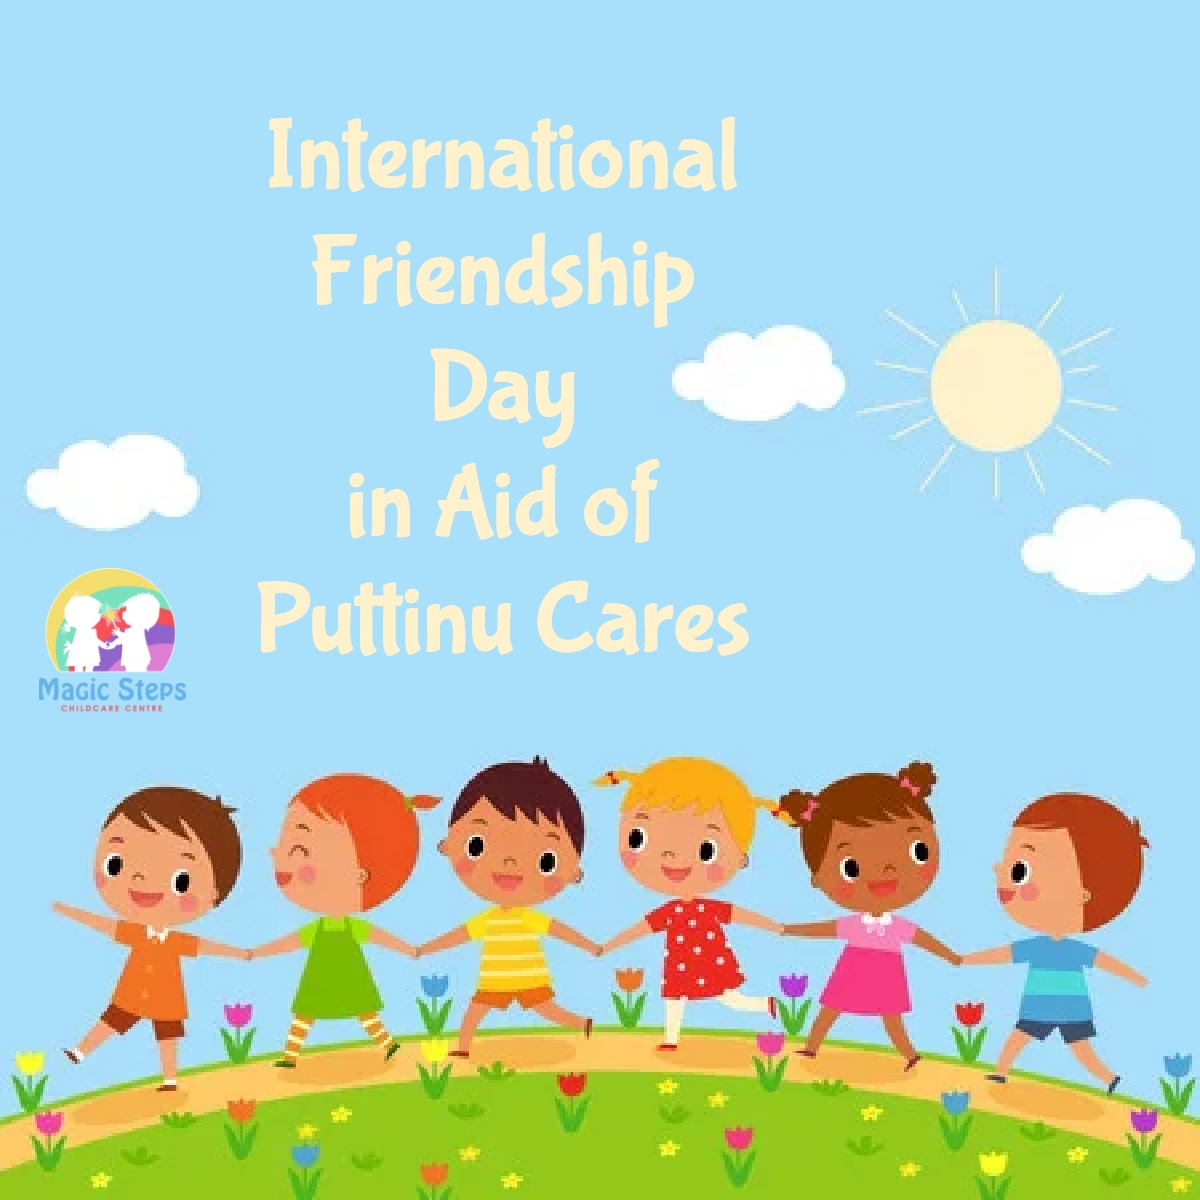 International Friendship Day in Aid of Puttinu Cares- Friday 29th July